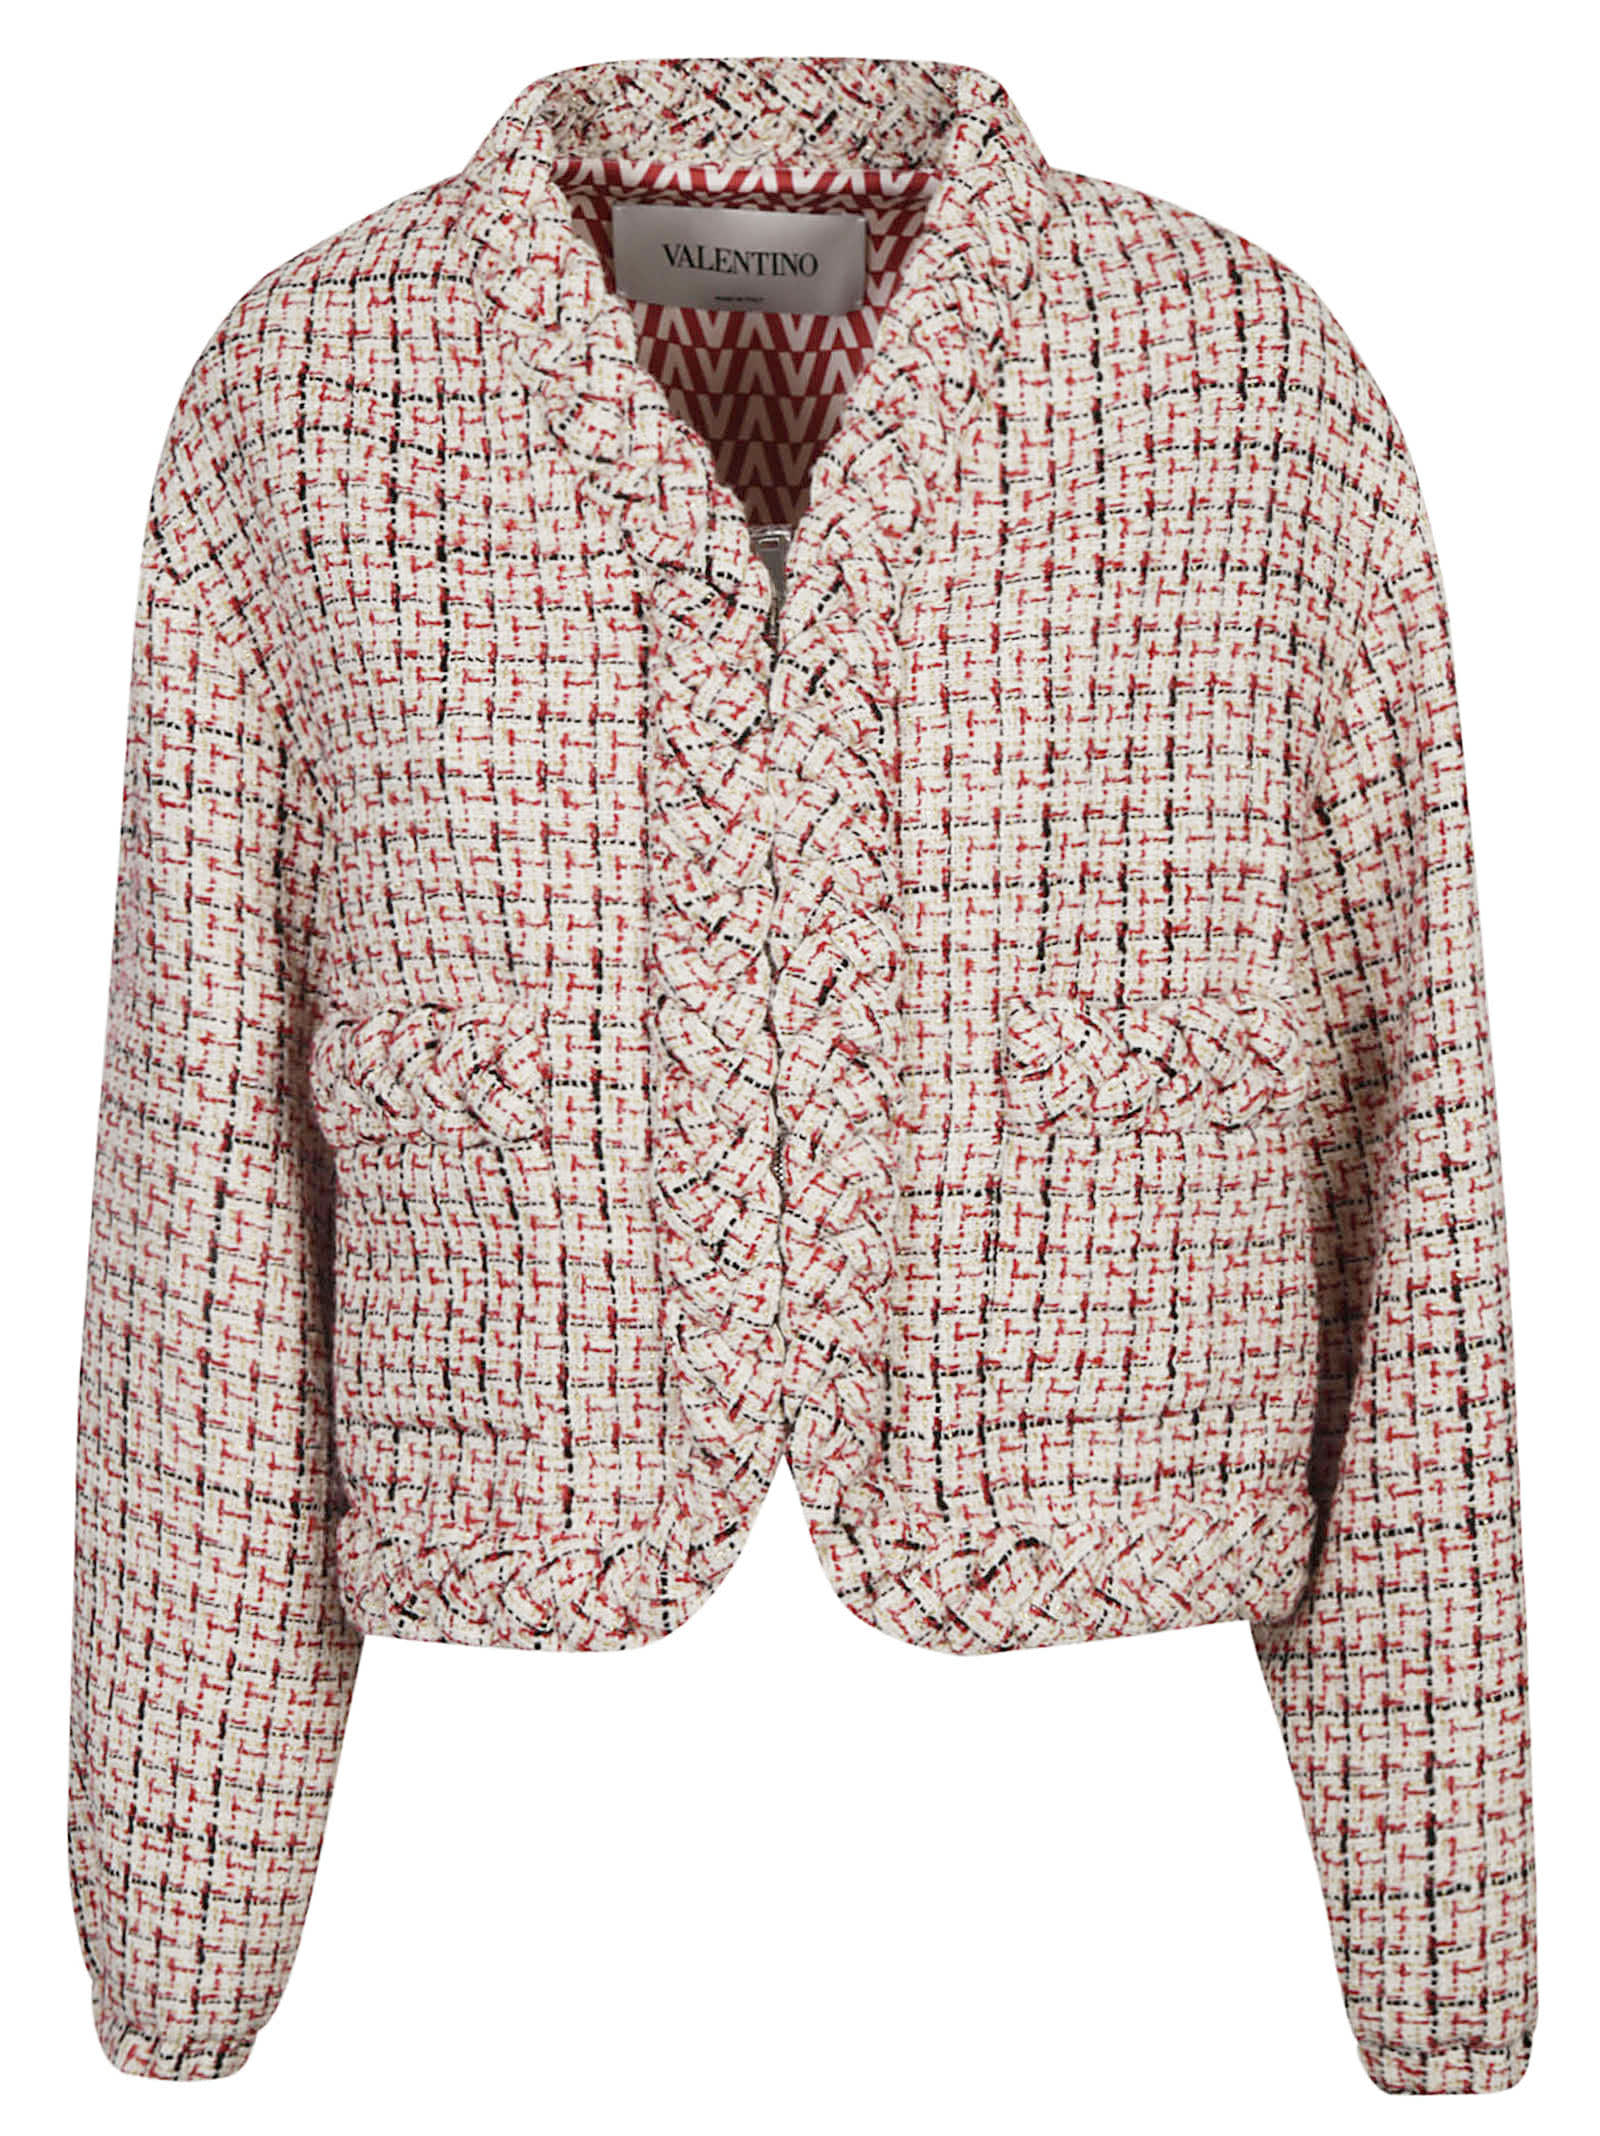 Valentino Woven Trimmed Tweed Jacket